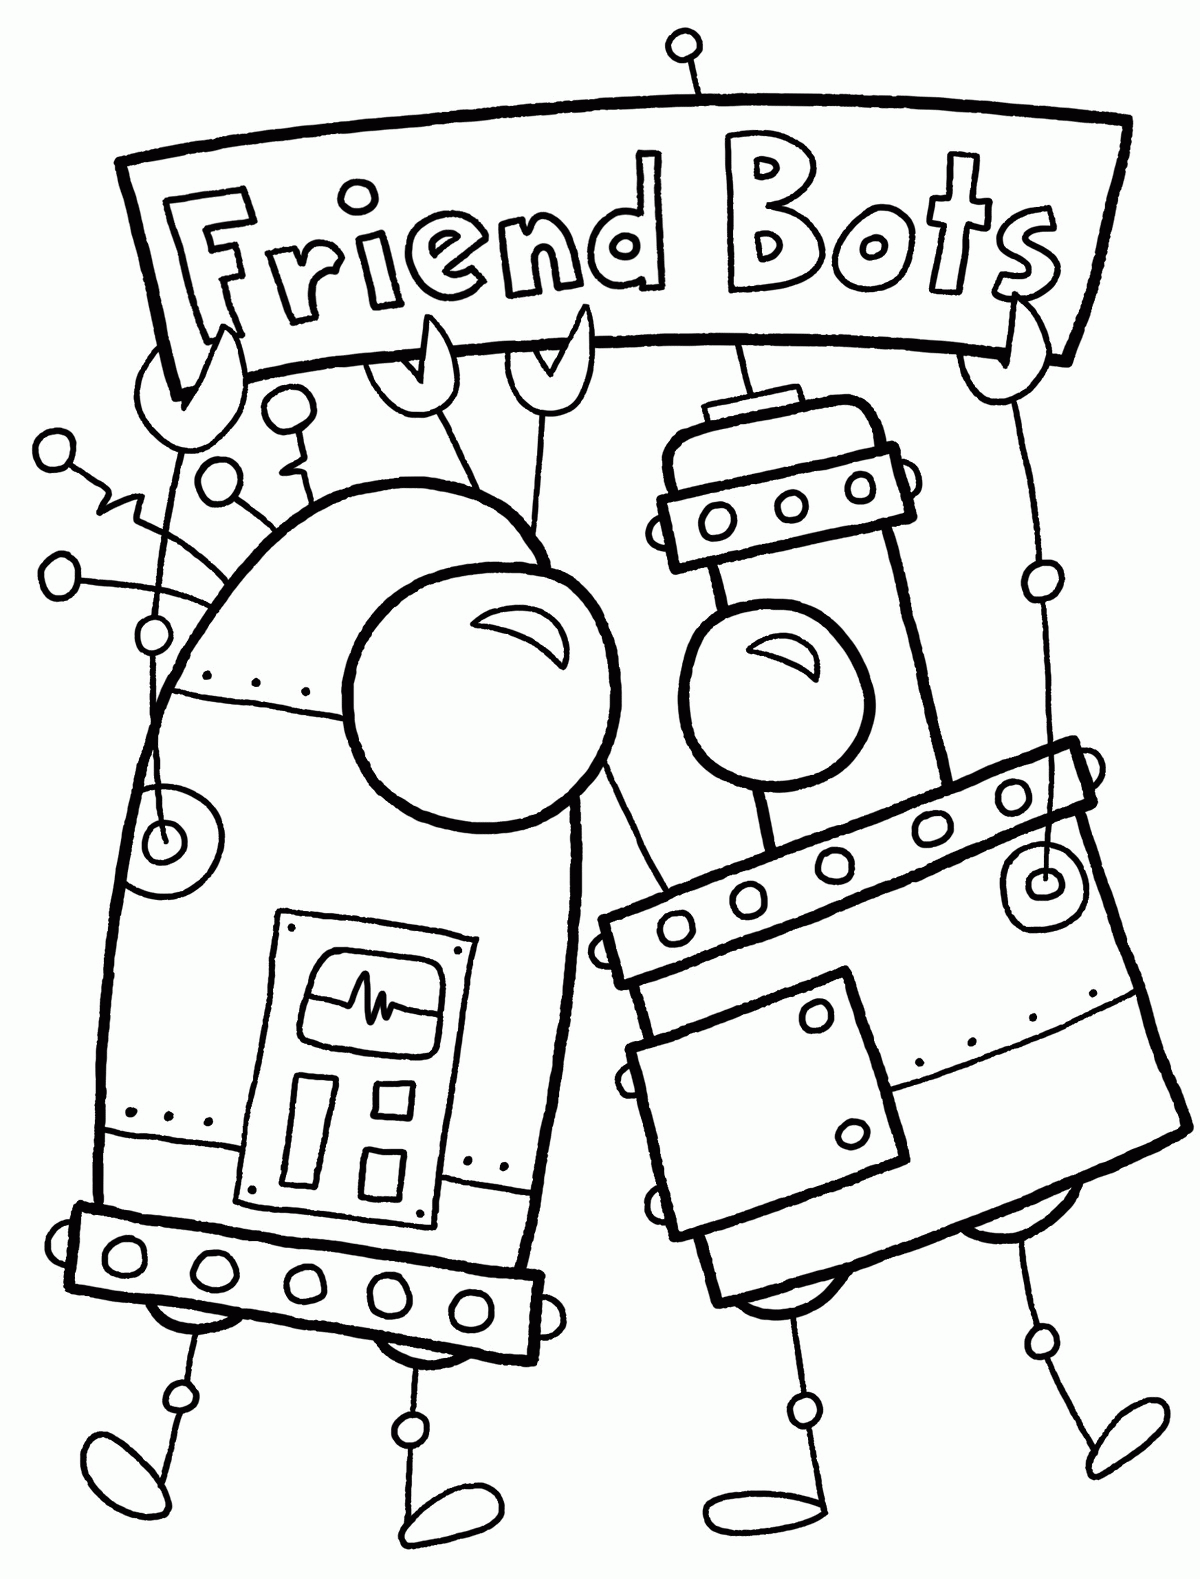 Monitoring Robot Coloring Page Free Printable Coloring Pages for Kids